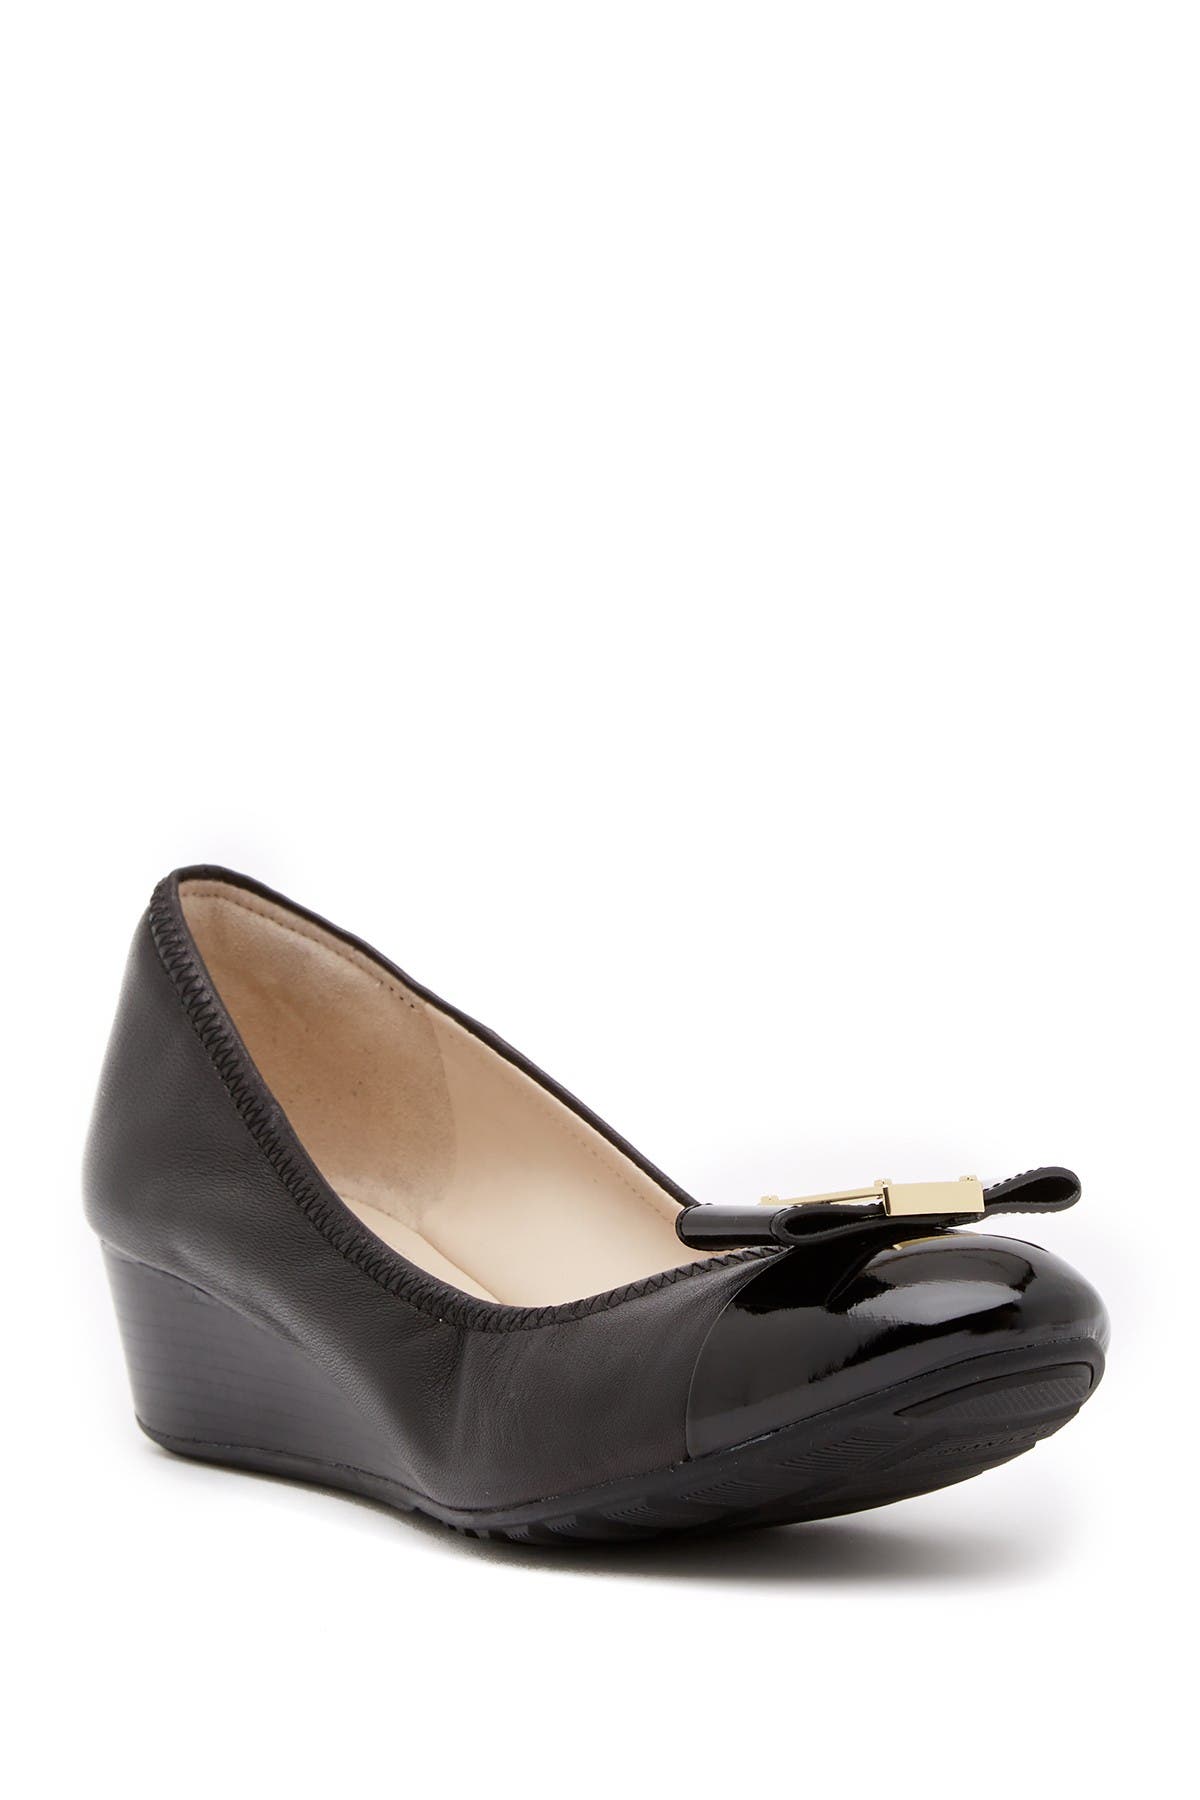 Cole Haan | Emory Bow Leather Wedge 